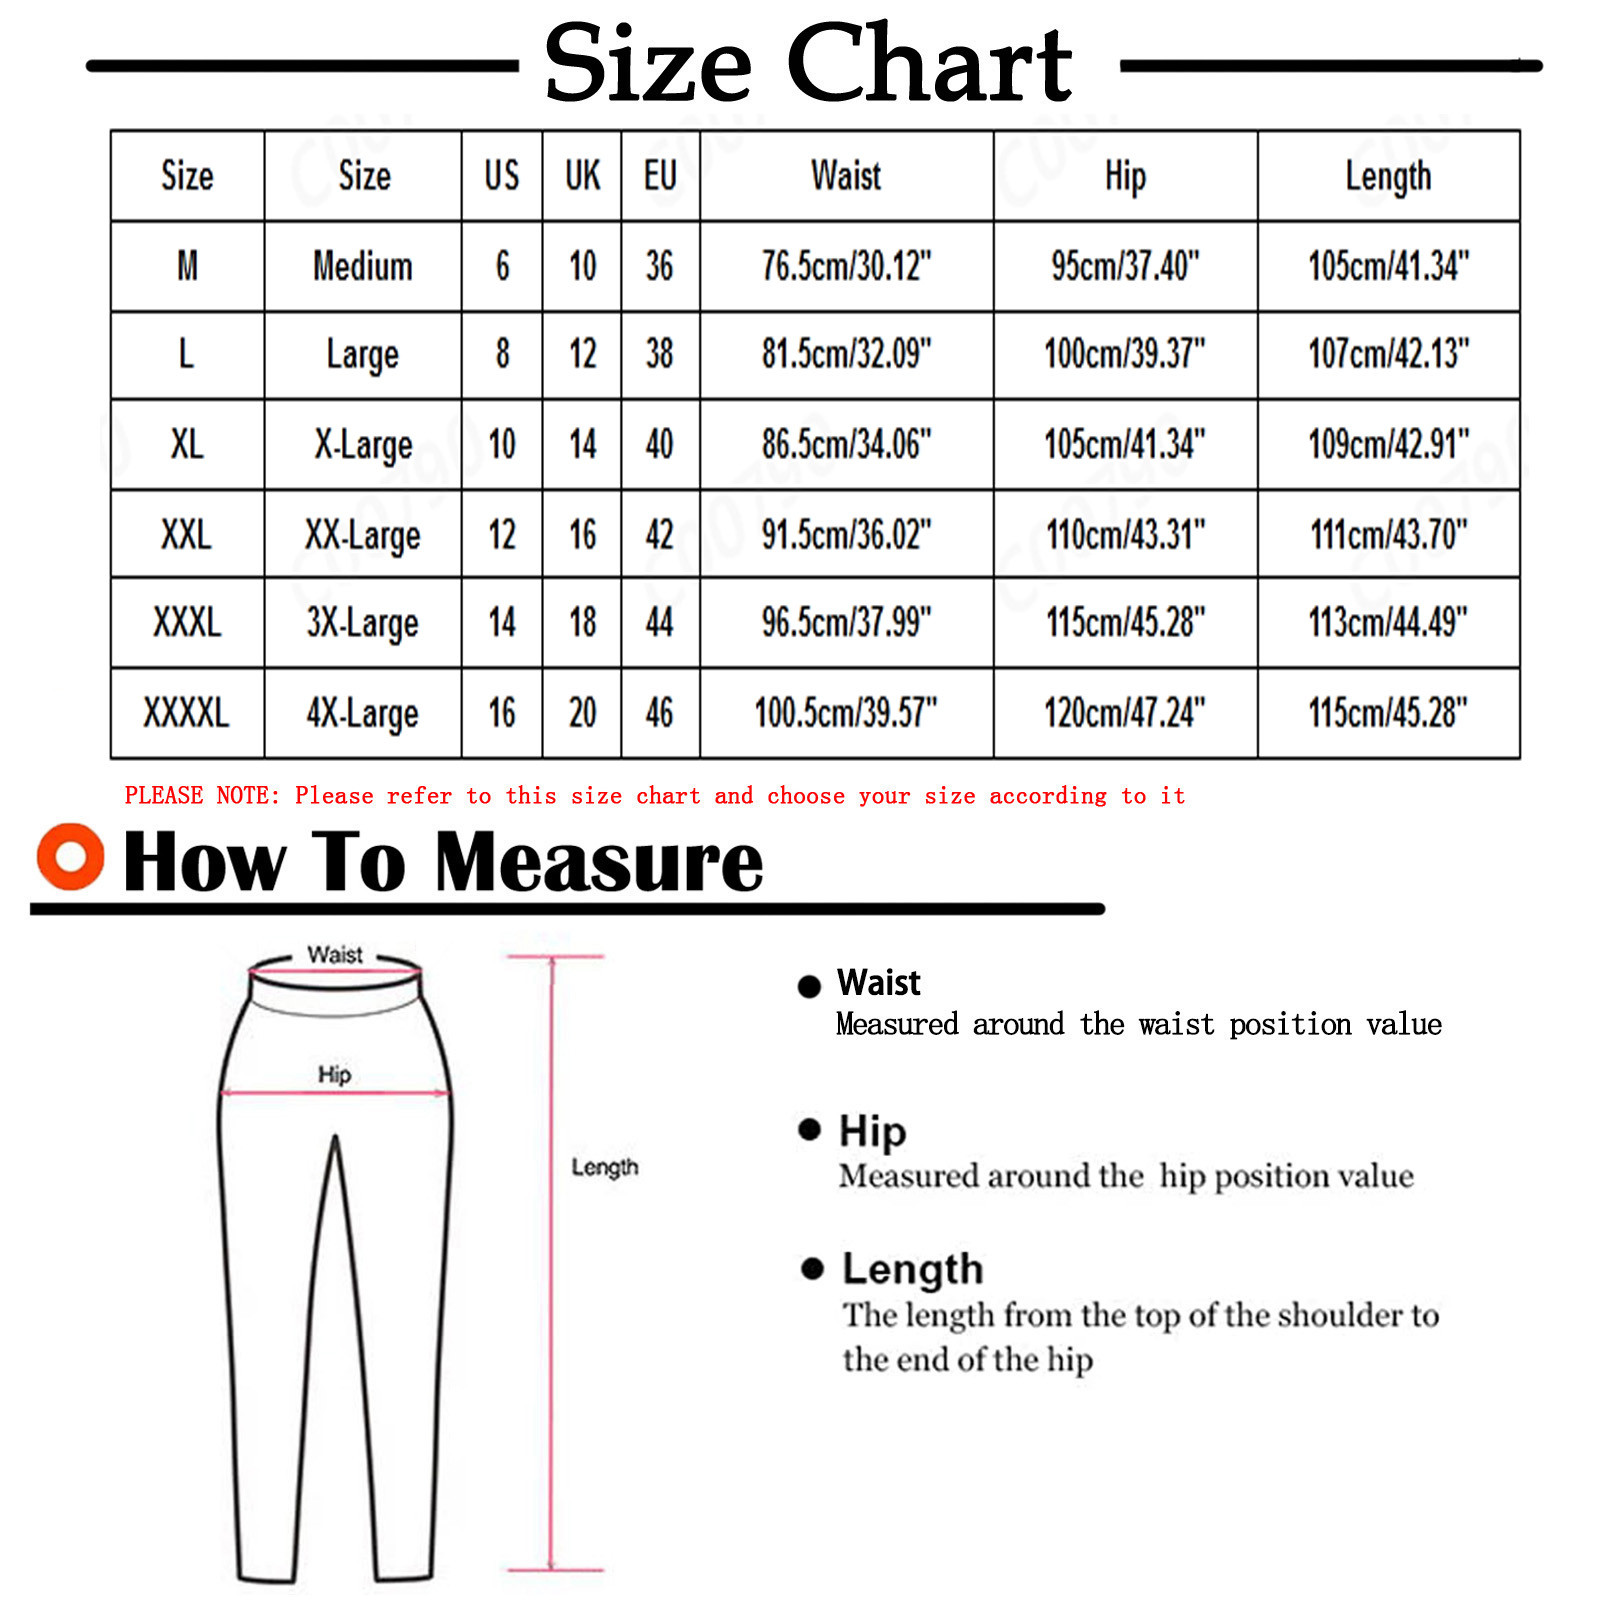 Pants for Men's Jeans Newly Slim Ripped Hip-hop Stretch Denim Cargo Pants Motorcycle Capri Trouse Pencil Pants - image 2 of 4